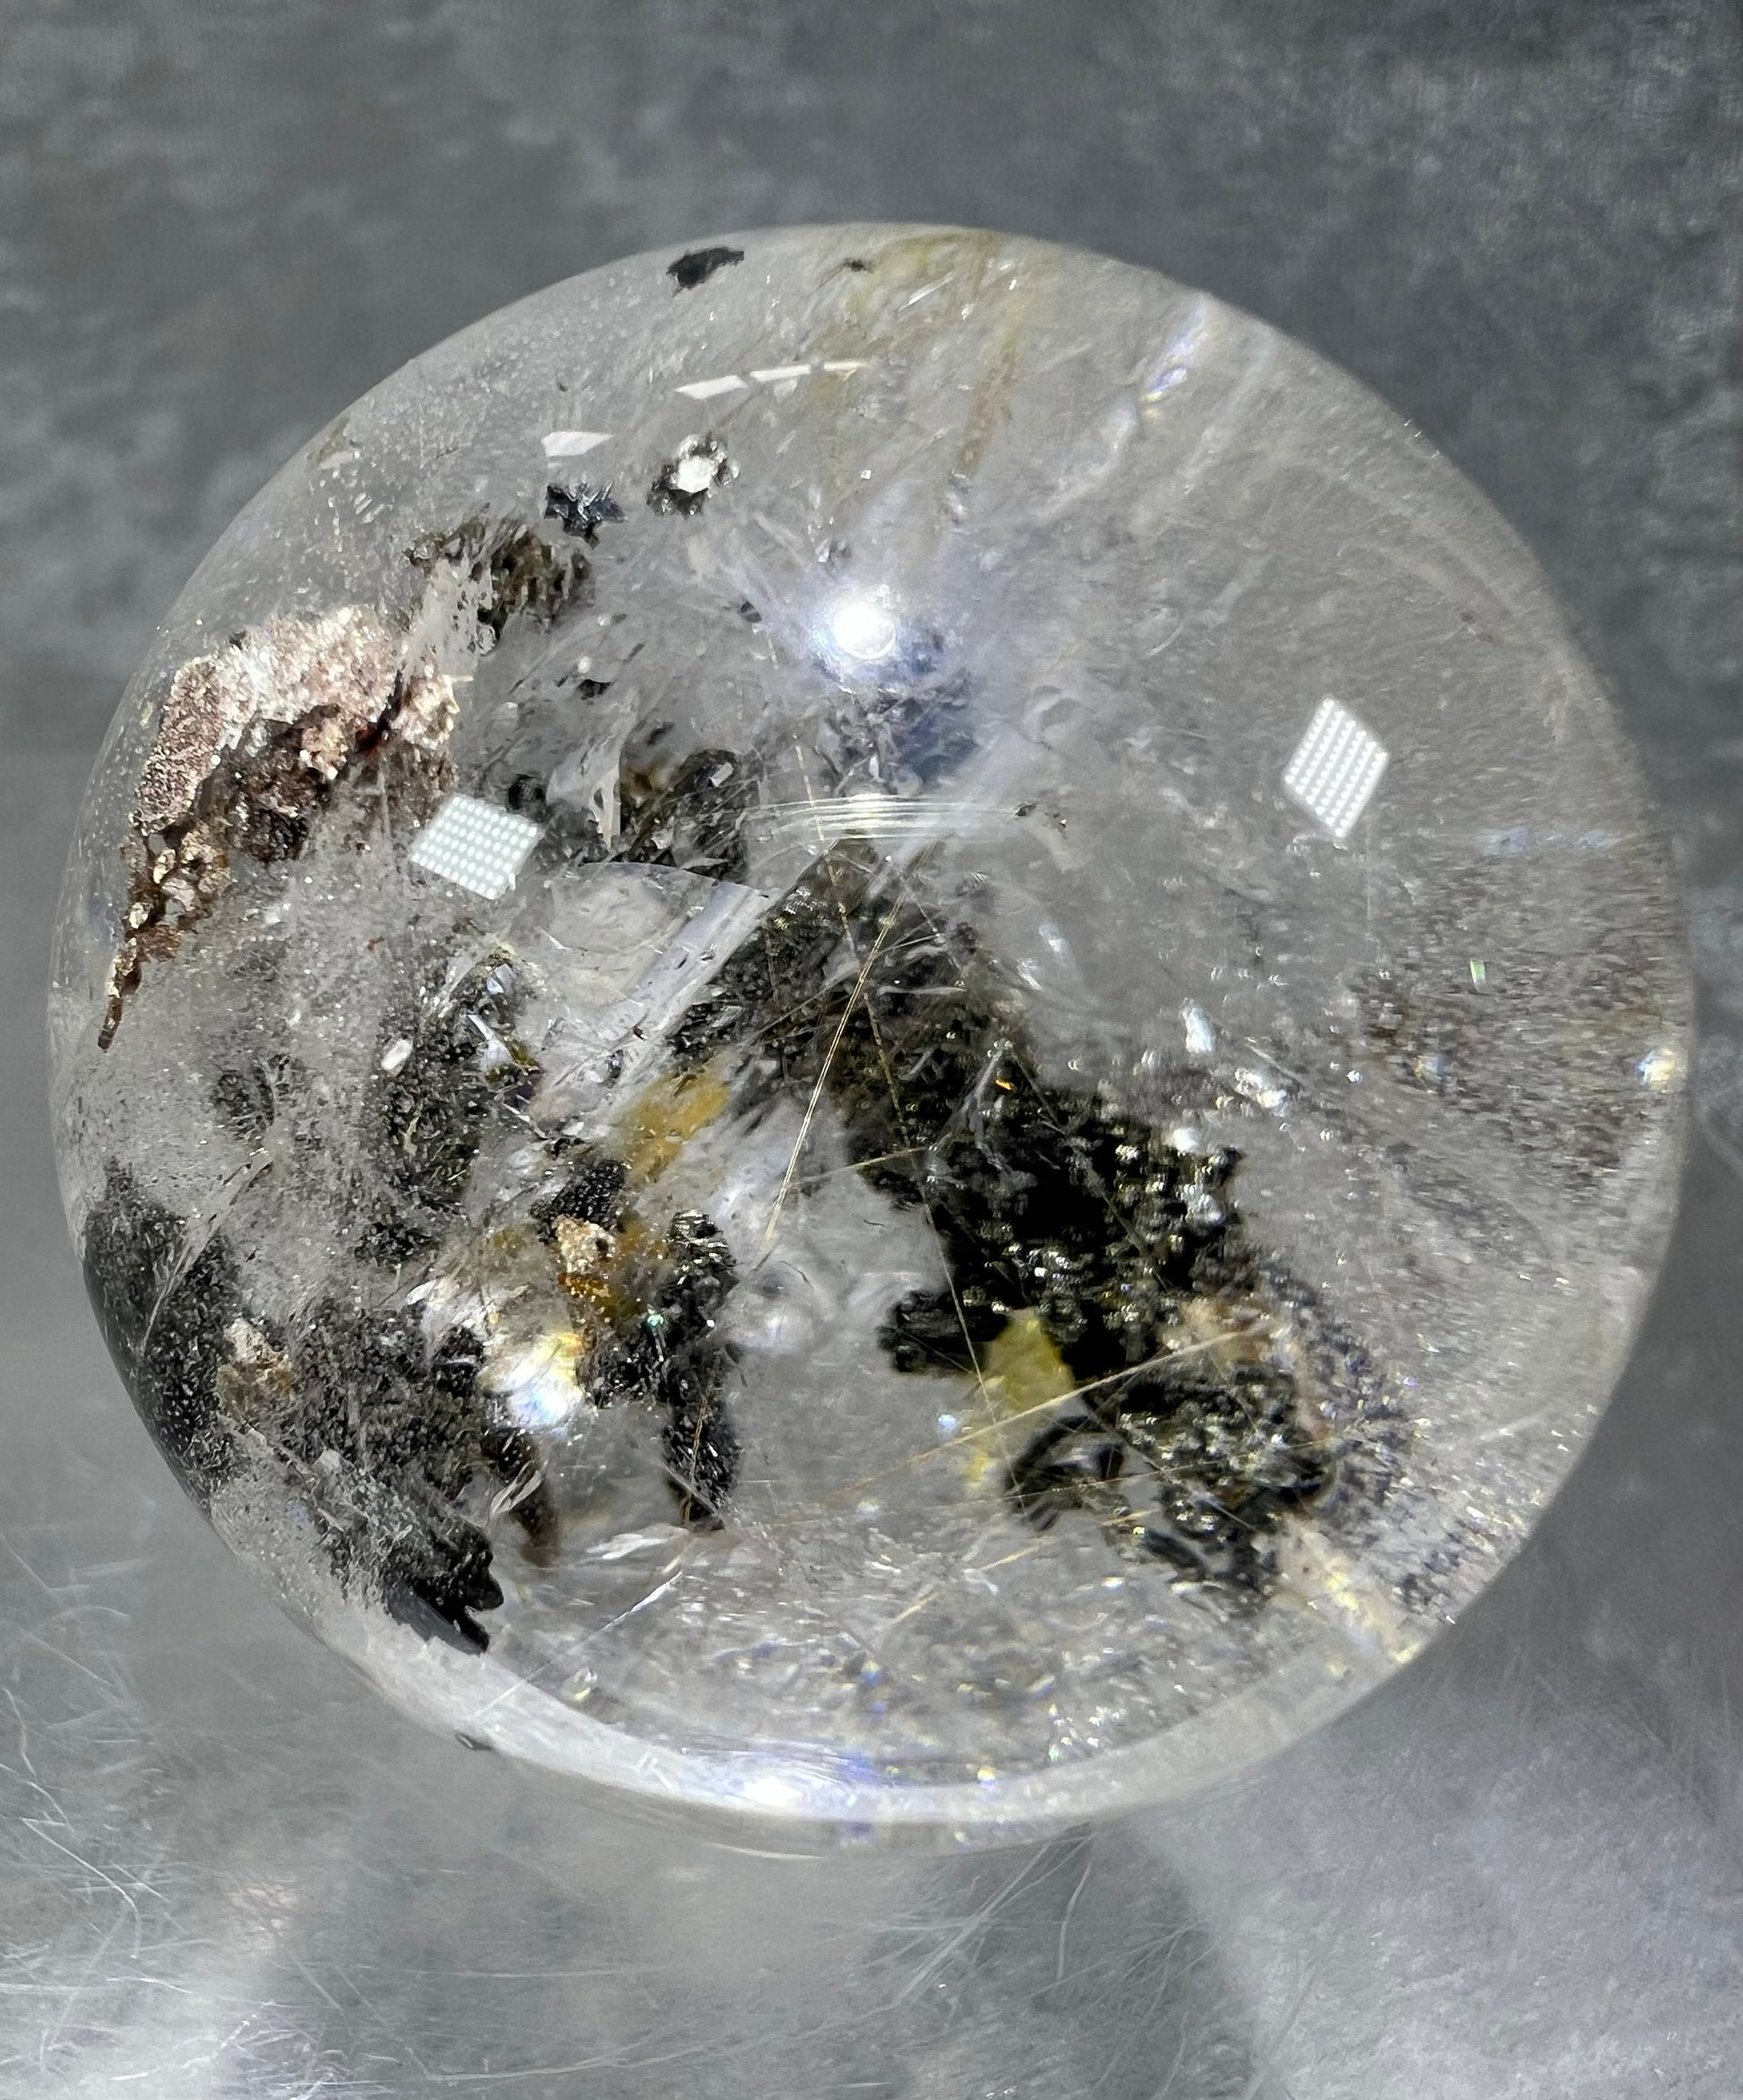 Gorgeous Rutile And Garden Quartz Sphere With Huge Rainbows. Very Rare And Special Combination Of Inclusions. Incredible Crystal Sphere